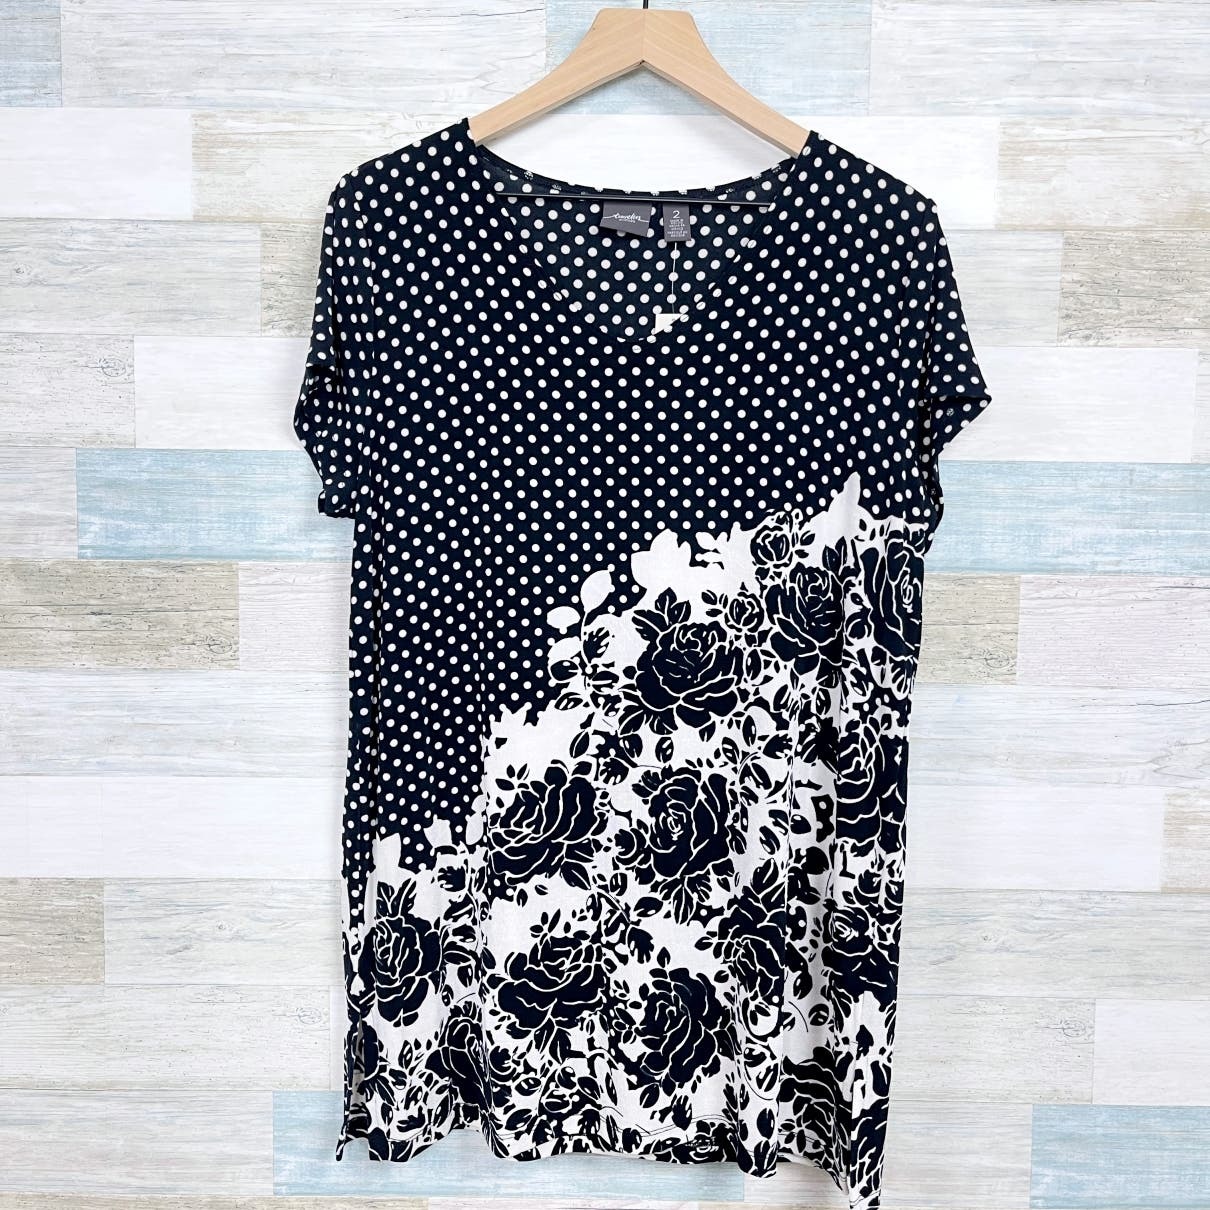 Primary image for Chicos Travelers Floral Dot Tunic Top Black White Short Sleeve Womens Large 2